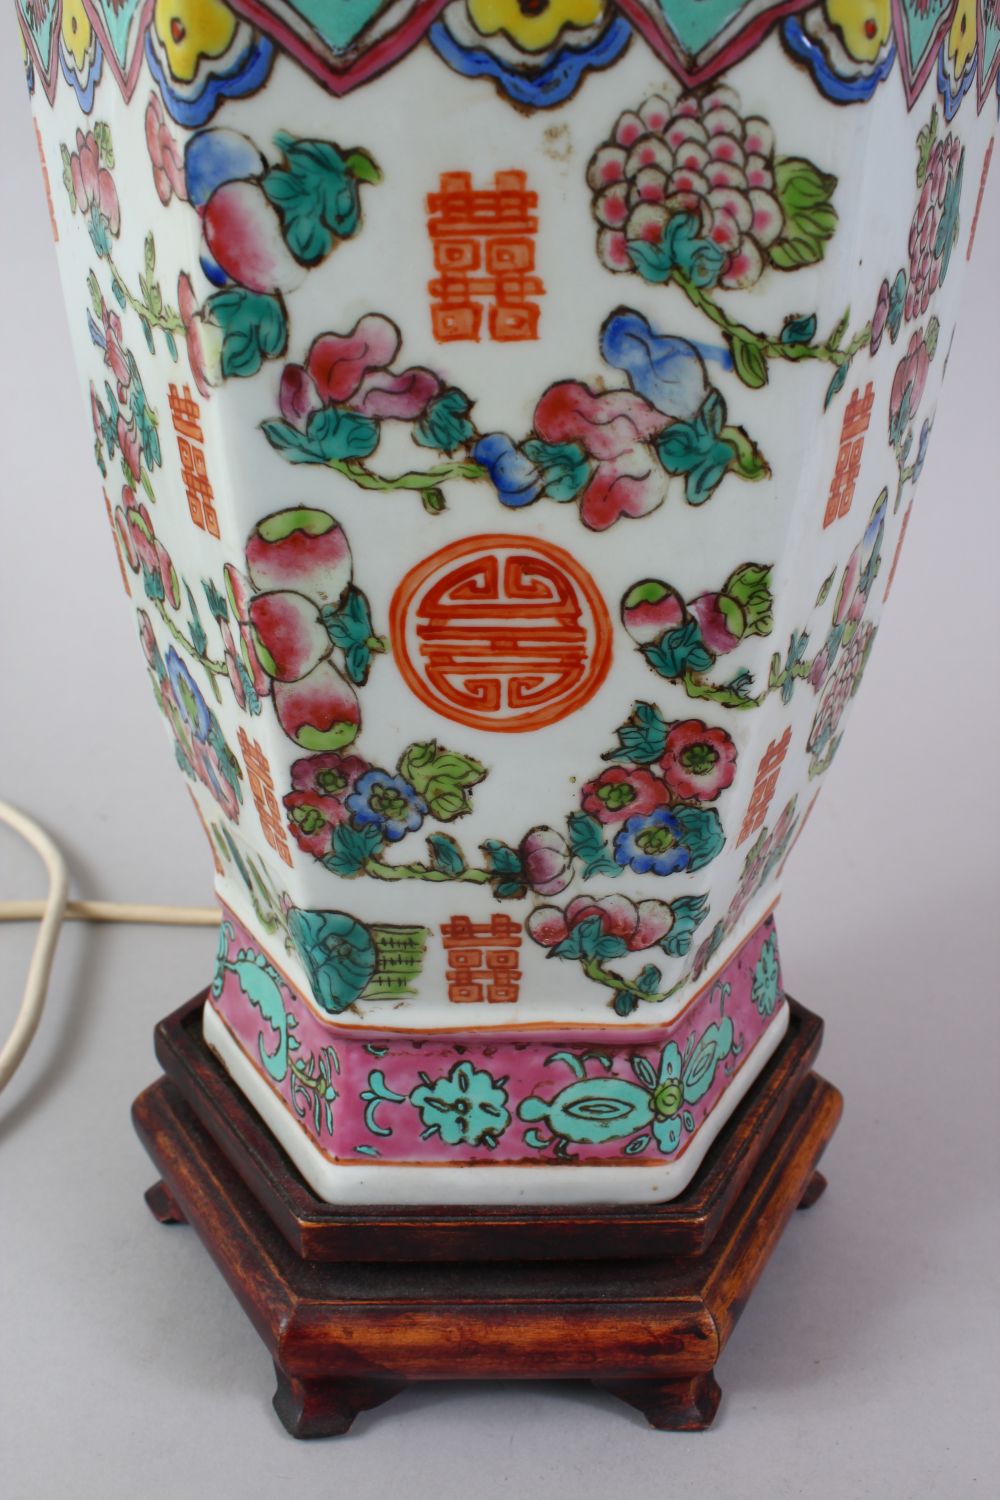 A 19TH / 20TH CENTURY CHINESE FAMILLE ROSE PORCELAIN VASE / LAMP, the body of the vase decorated - Image 3 of 3